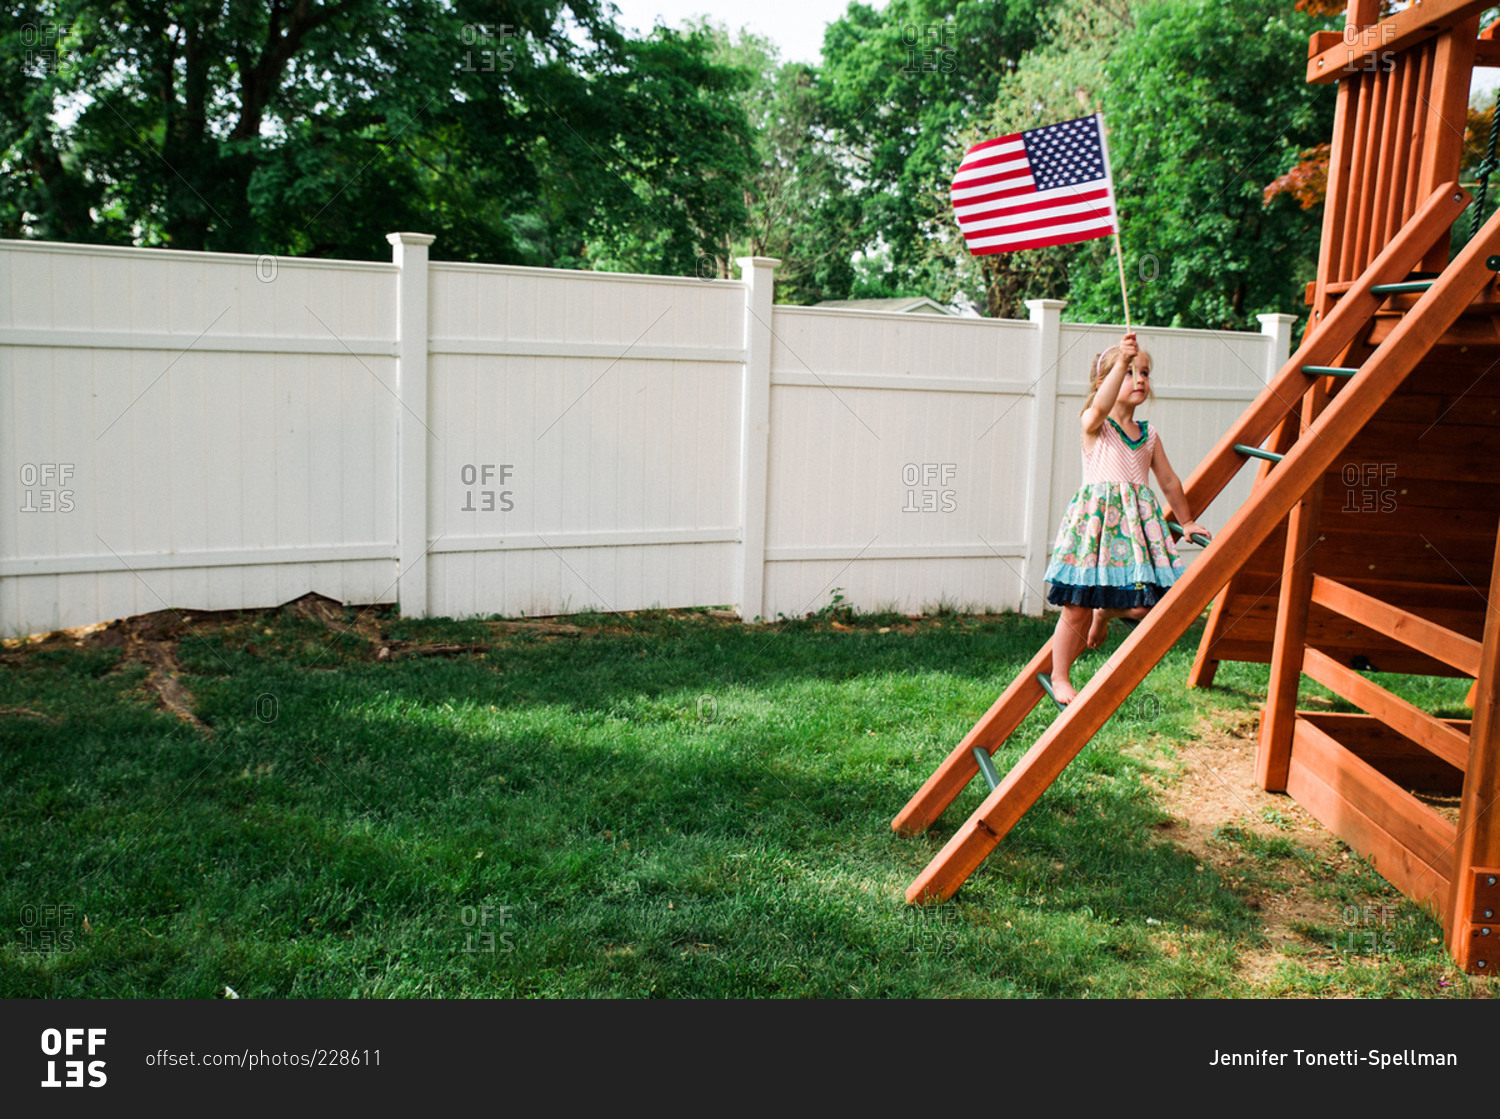 Child climbing up a wooden play structure with an American flag